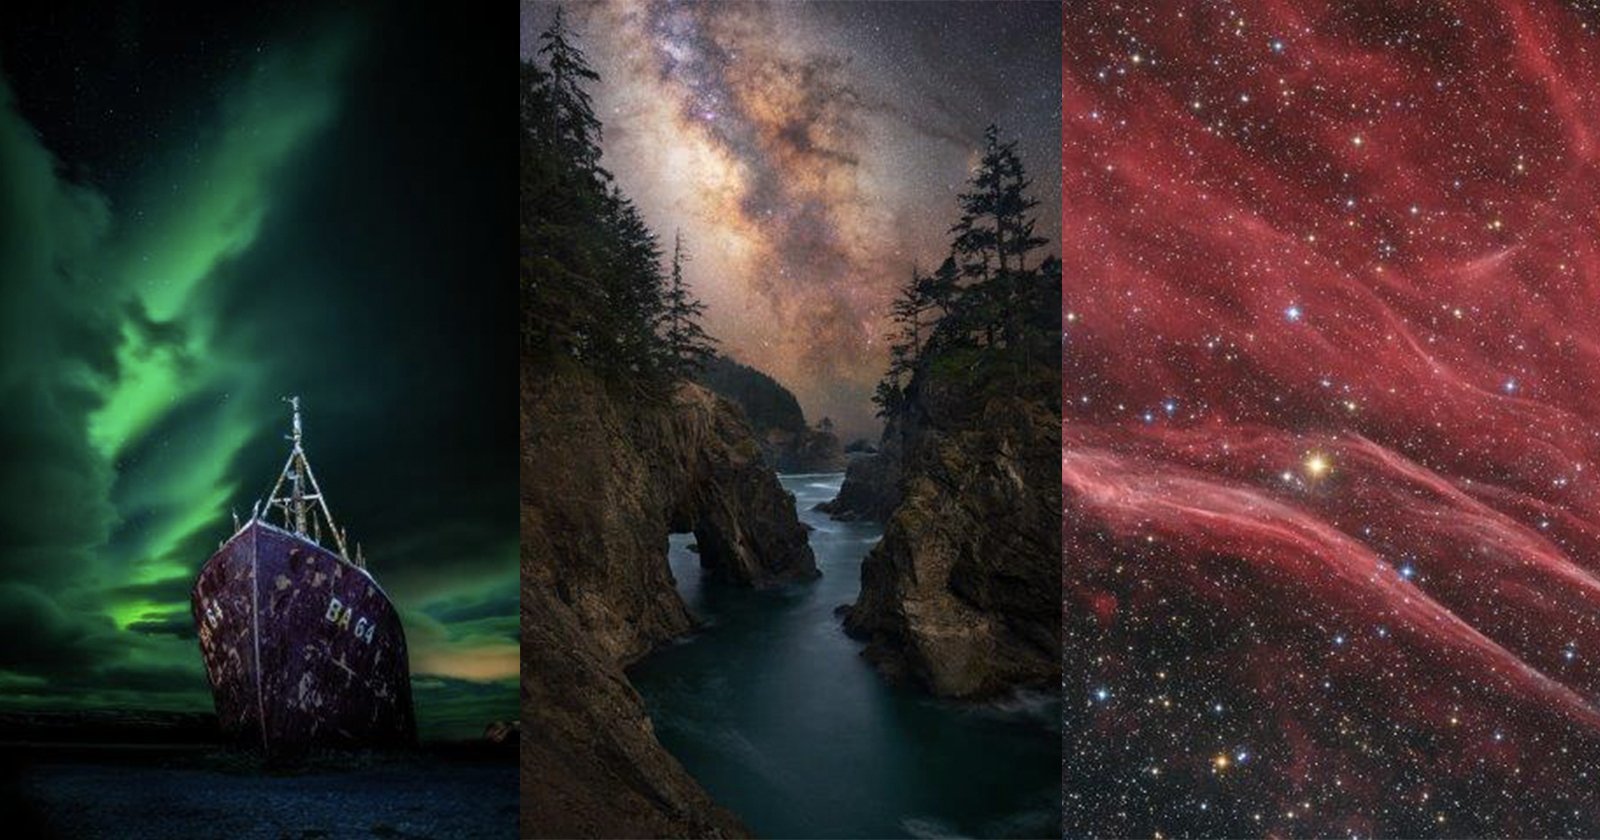 The Top Photos from the Astronomy Photographer of the Year 2022